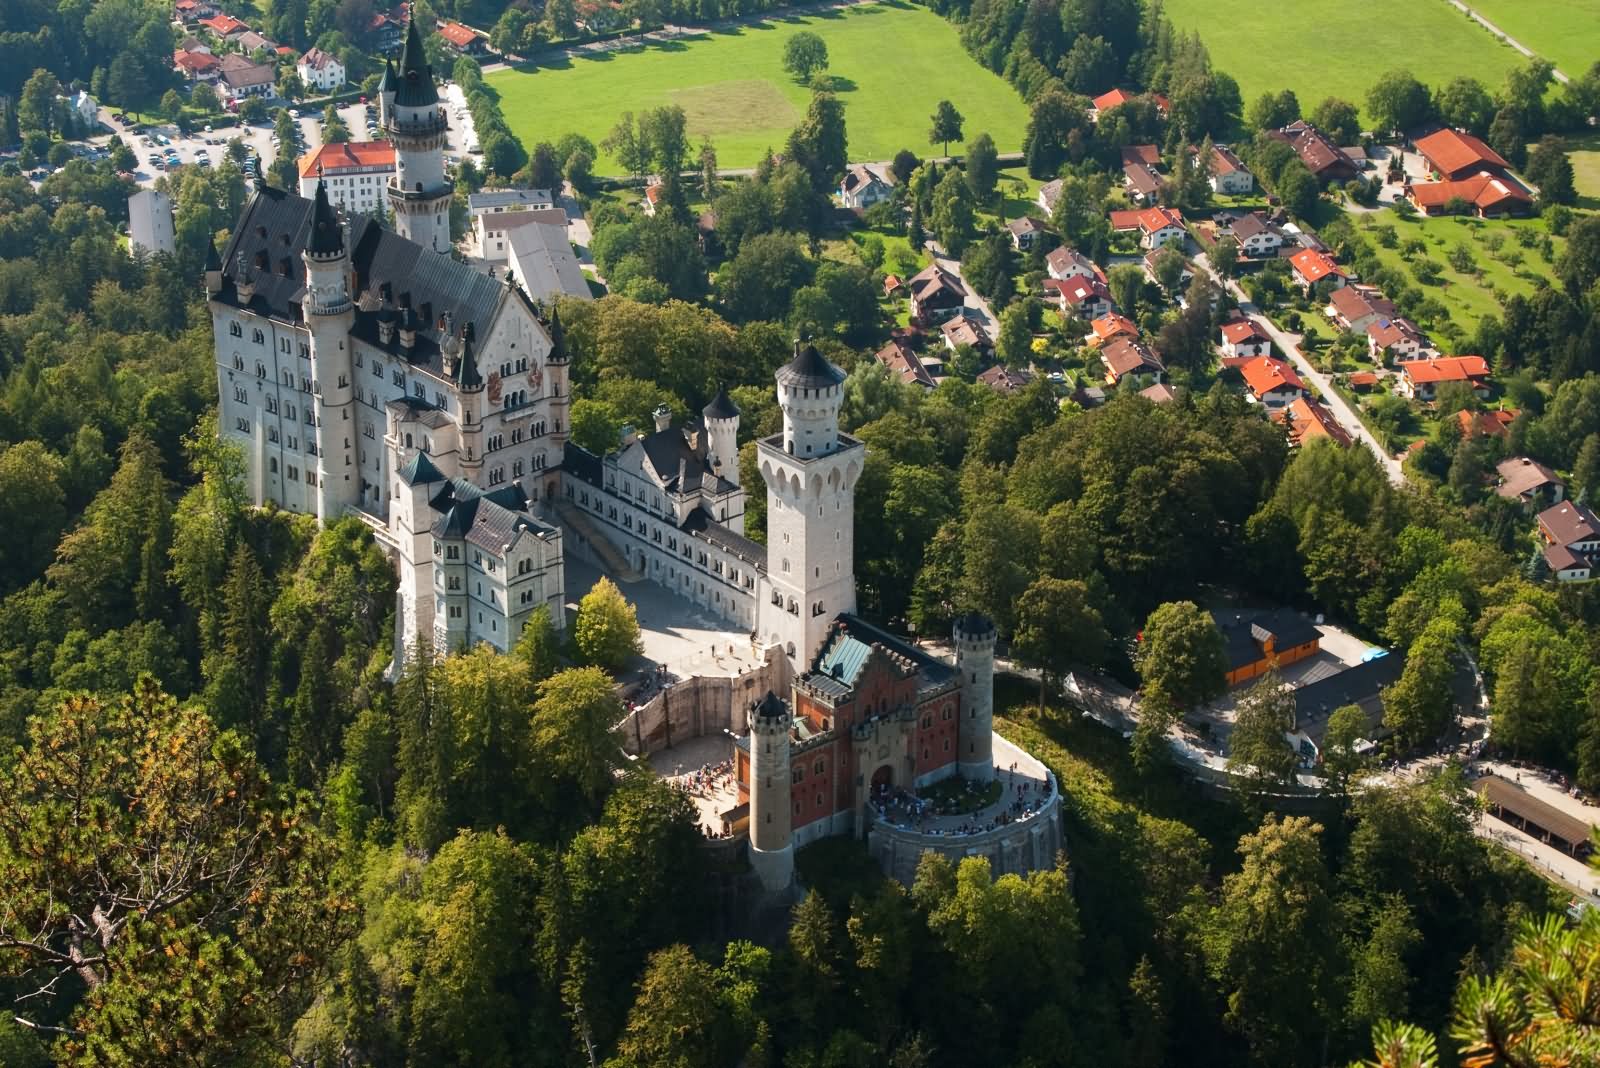 35 Incredible View Images Of The Neuschwanstein Castle In Germany